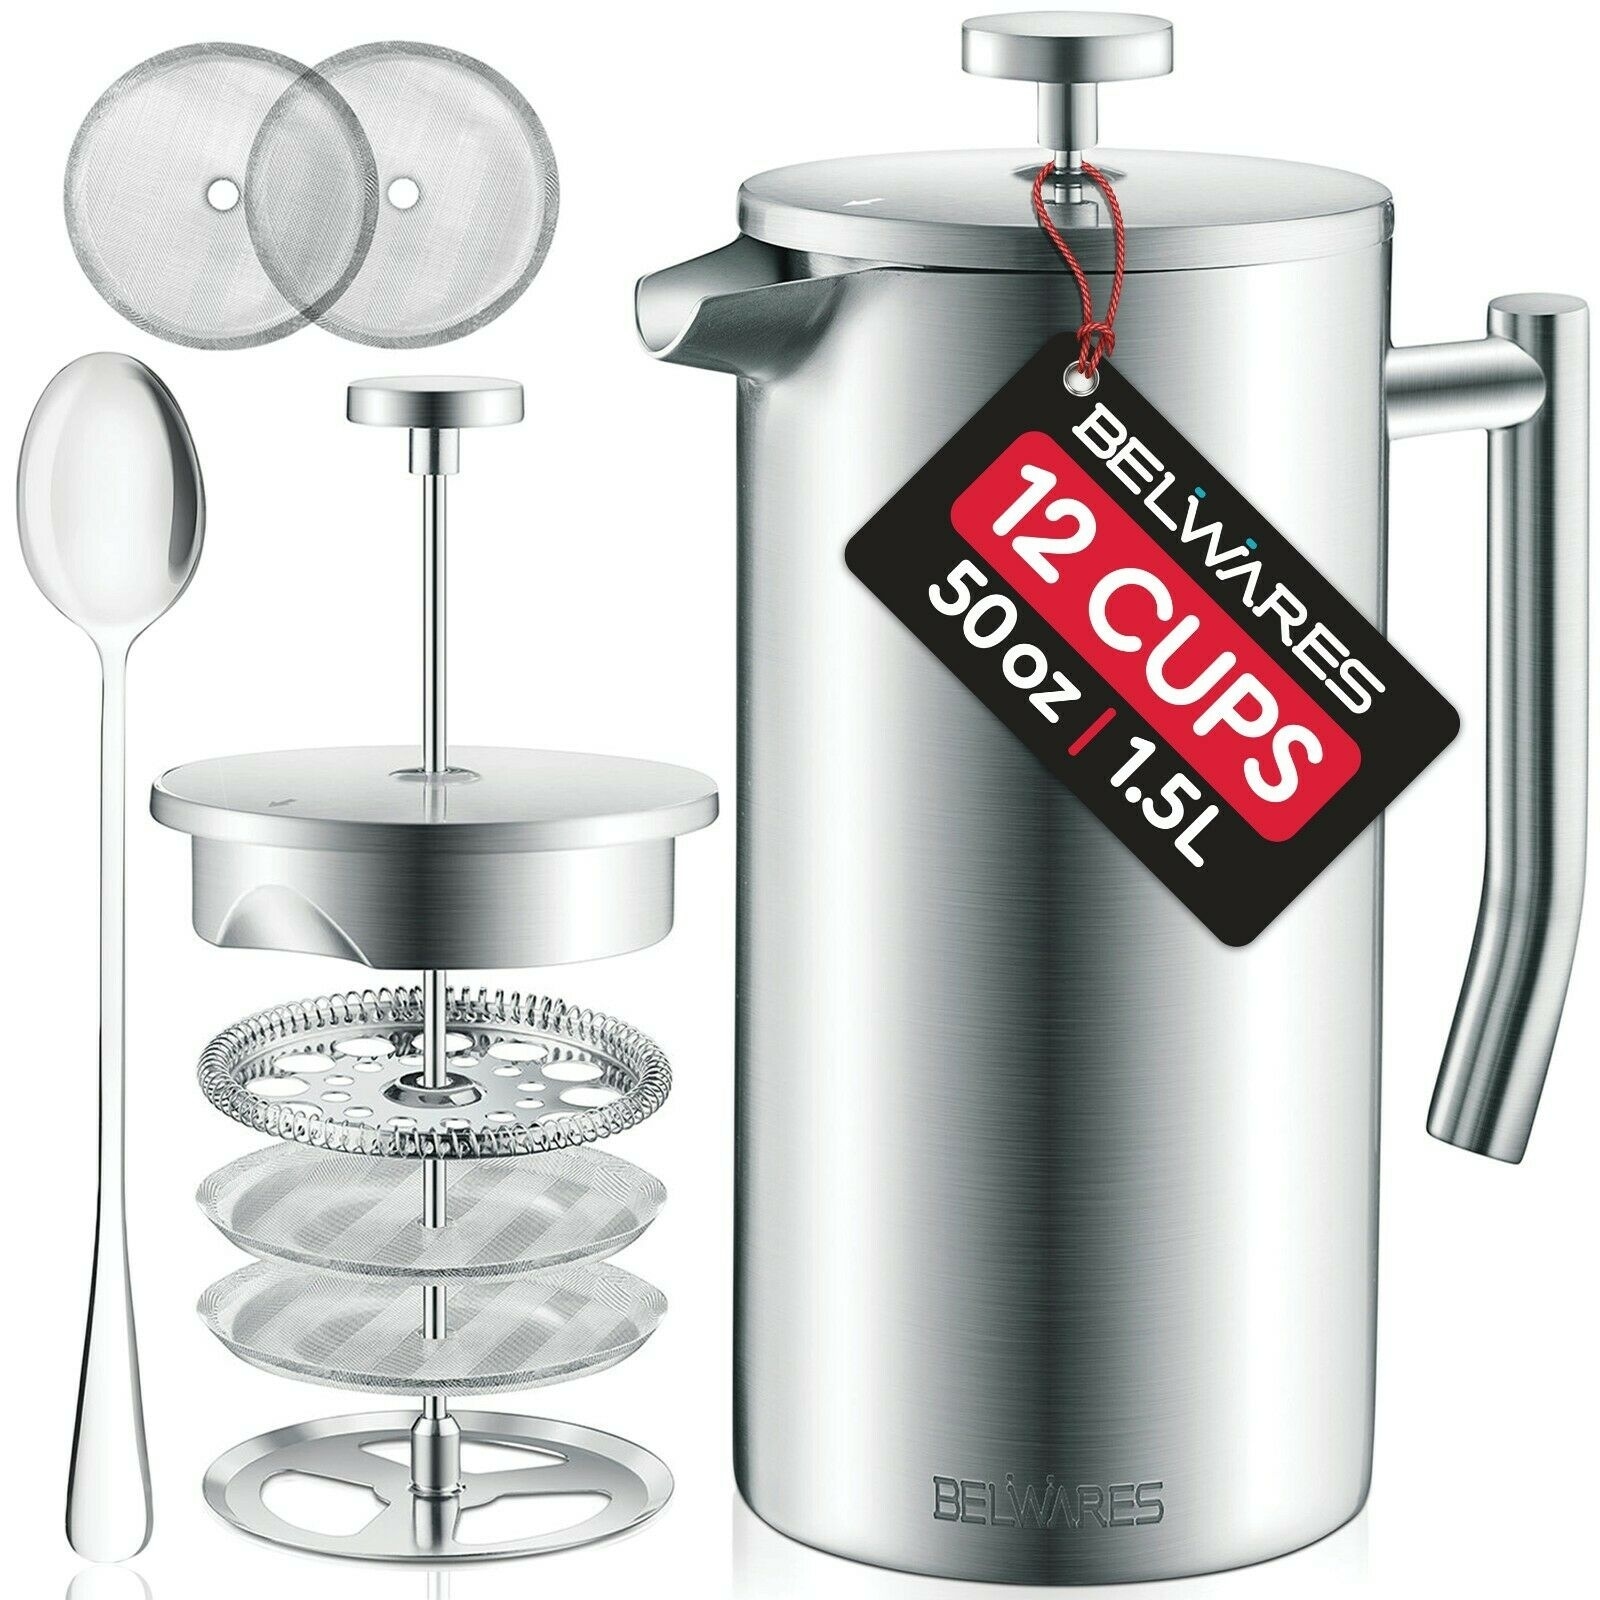 https://ak1.ostkcdn.com/images/products/is/images/direct/b857fe13d6d0f876c3acefb7a43848ceec3d92e8/Belwares-Stainless-Steel-French-Coffee-Press%2C-With-Double-Wall-and-Extra-Filters.jpg